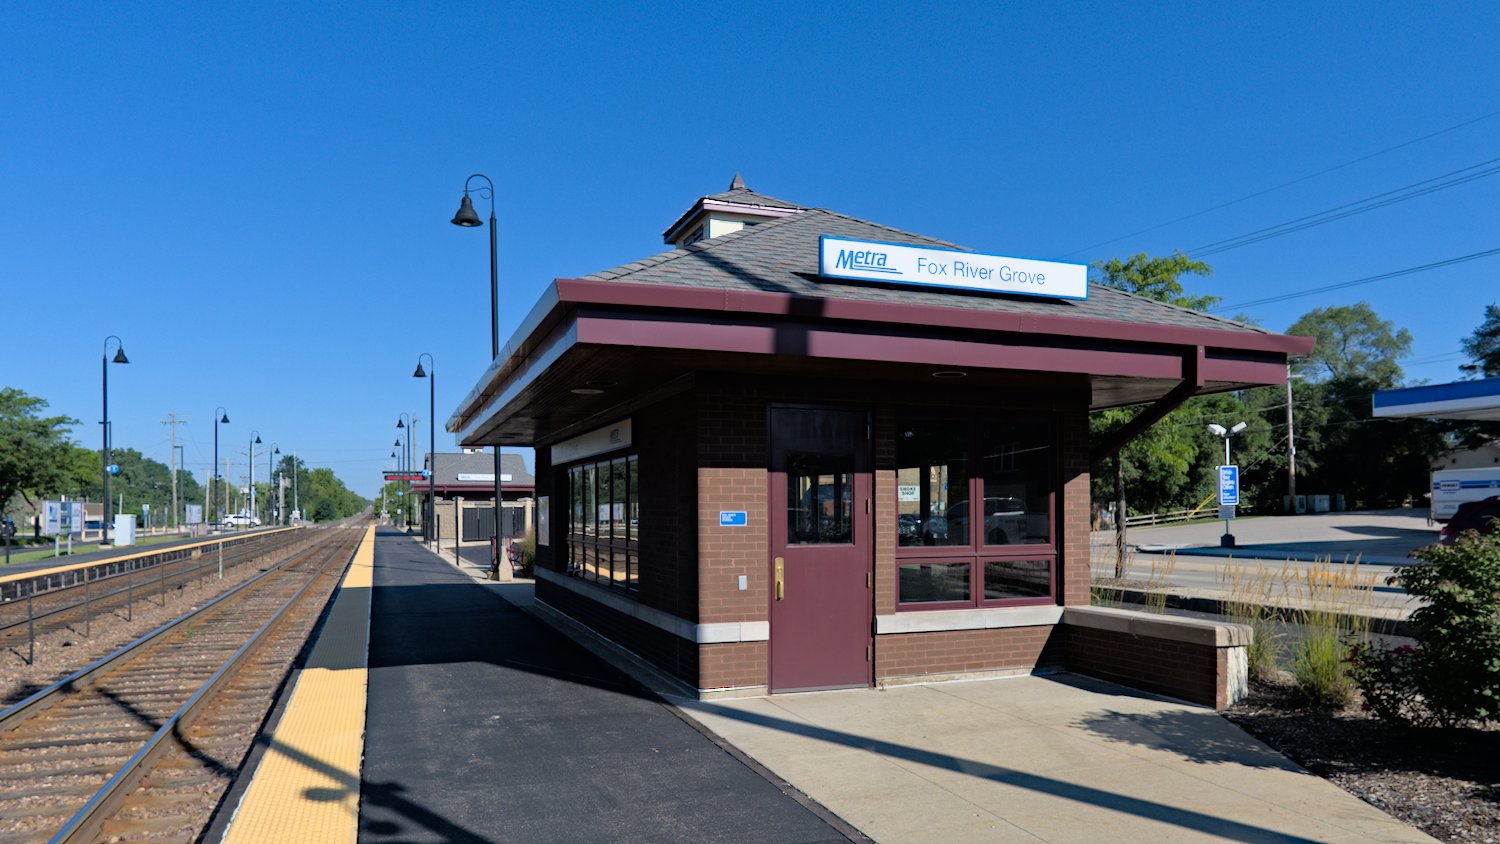 Fox River Grove Metra waiting shelter with main station in background.